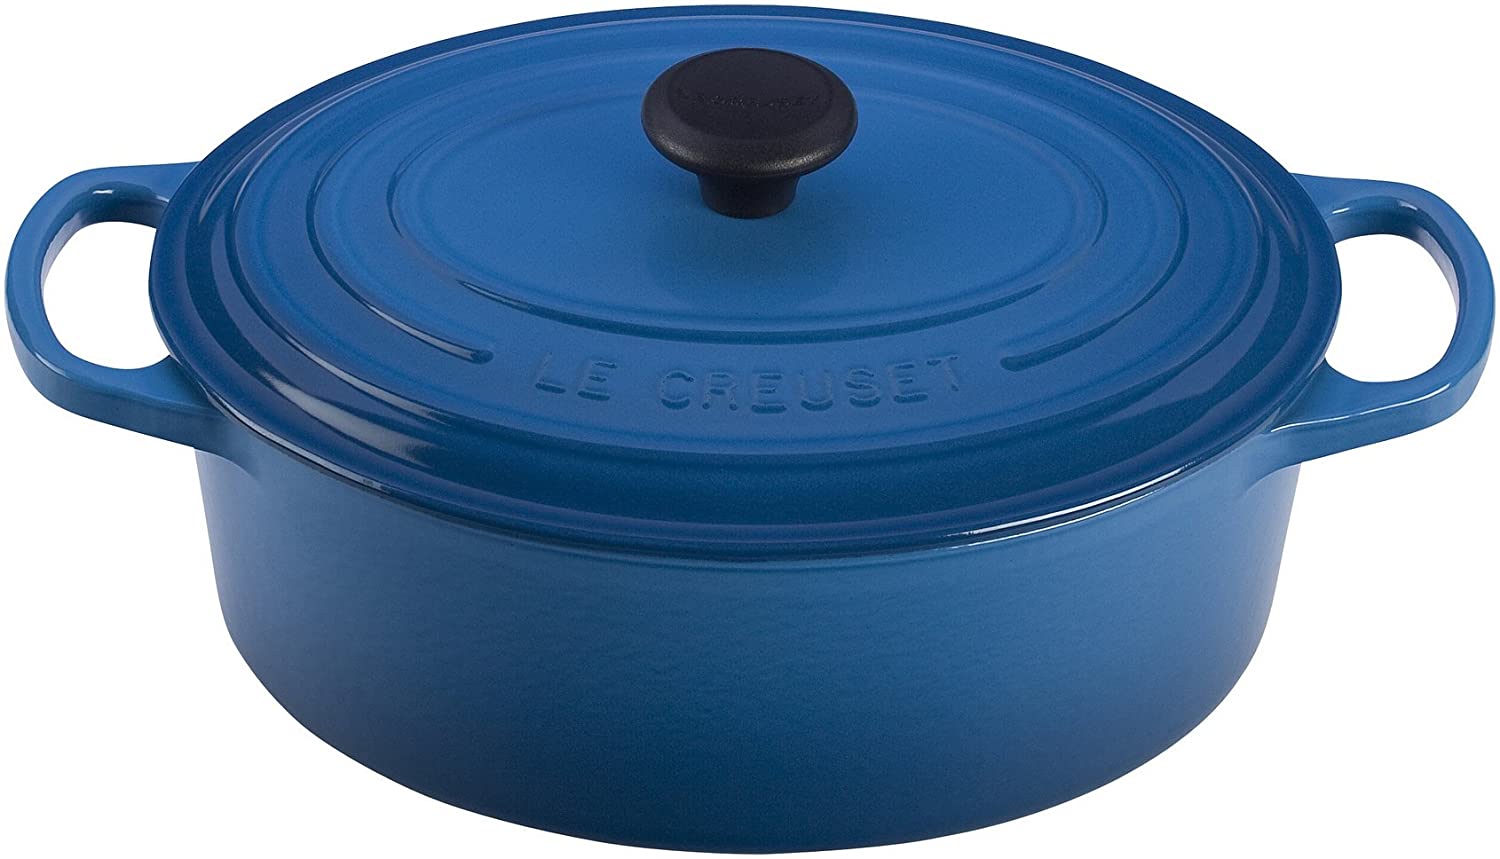 Up to 43 off Le Creuset Cookware, Bakeware and Accessories